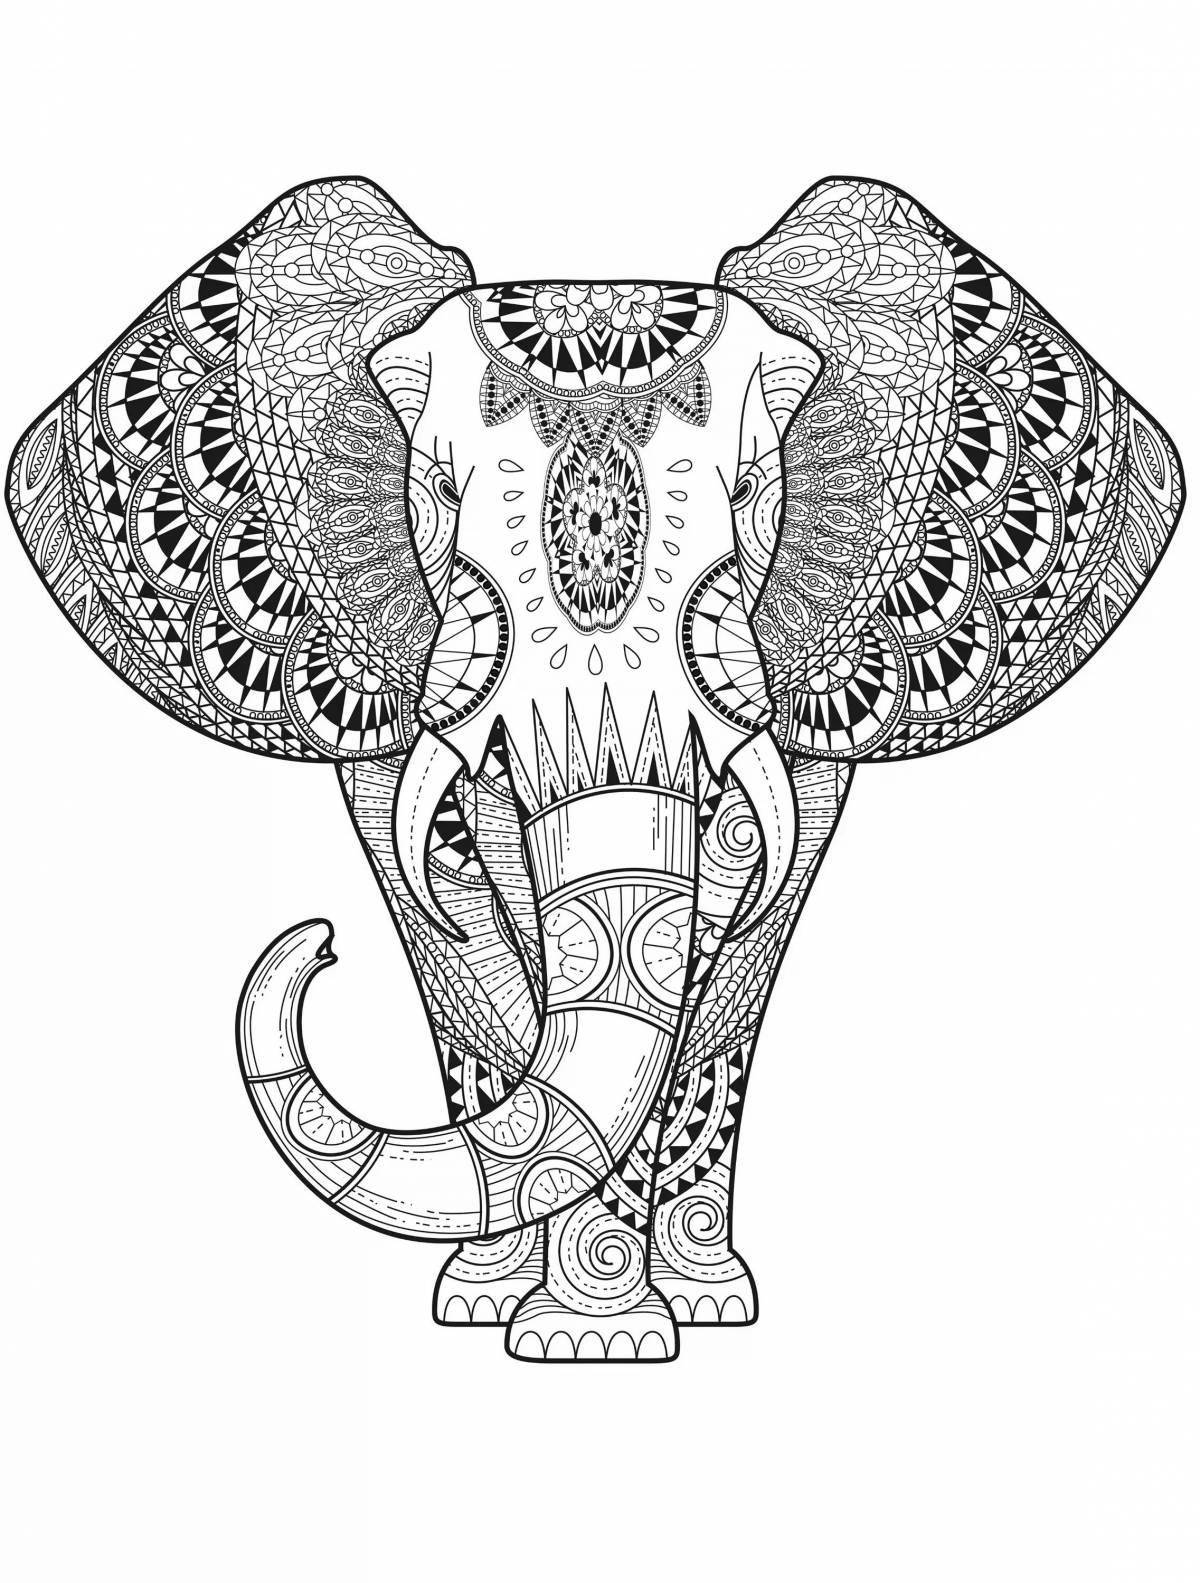 Exalted antistress elephant coloring book